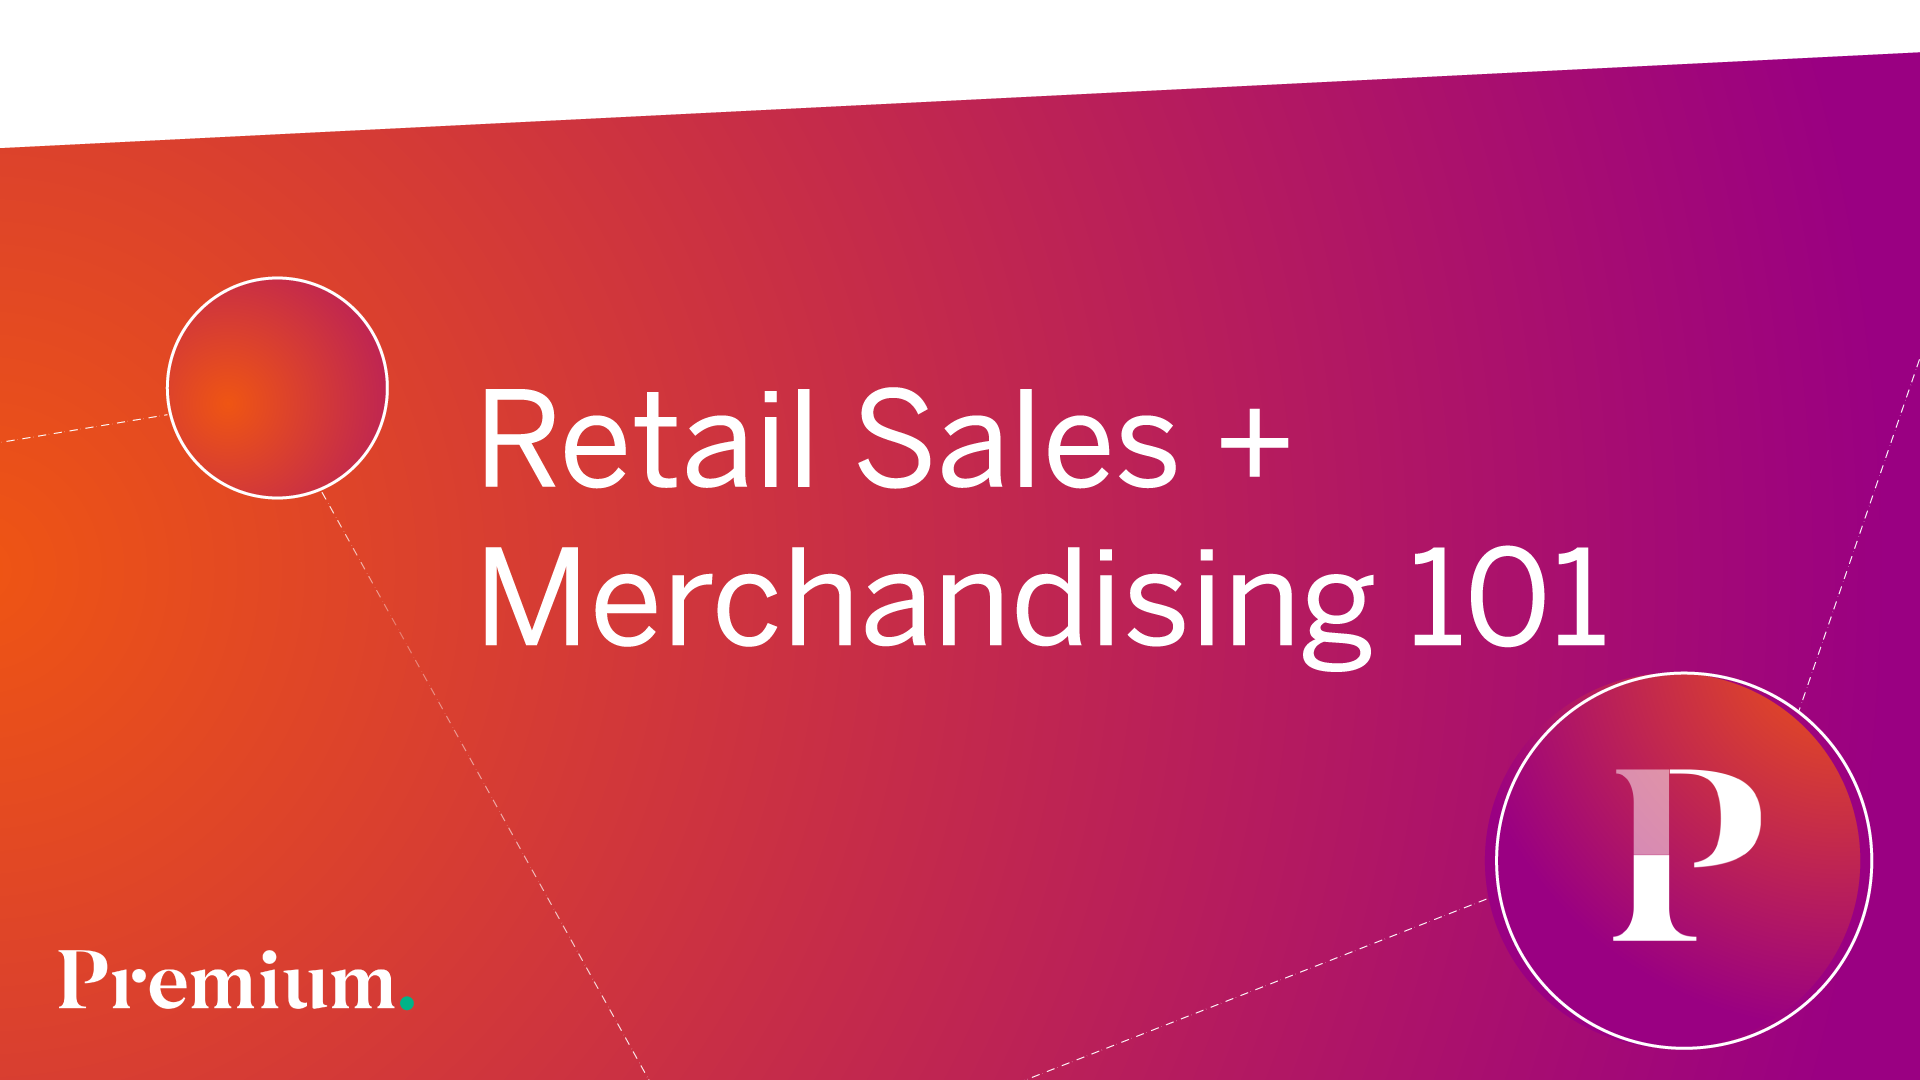 Retail Sales and Merchandising 101